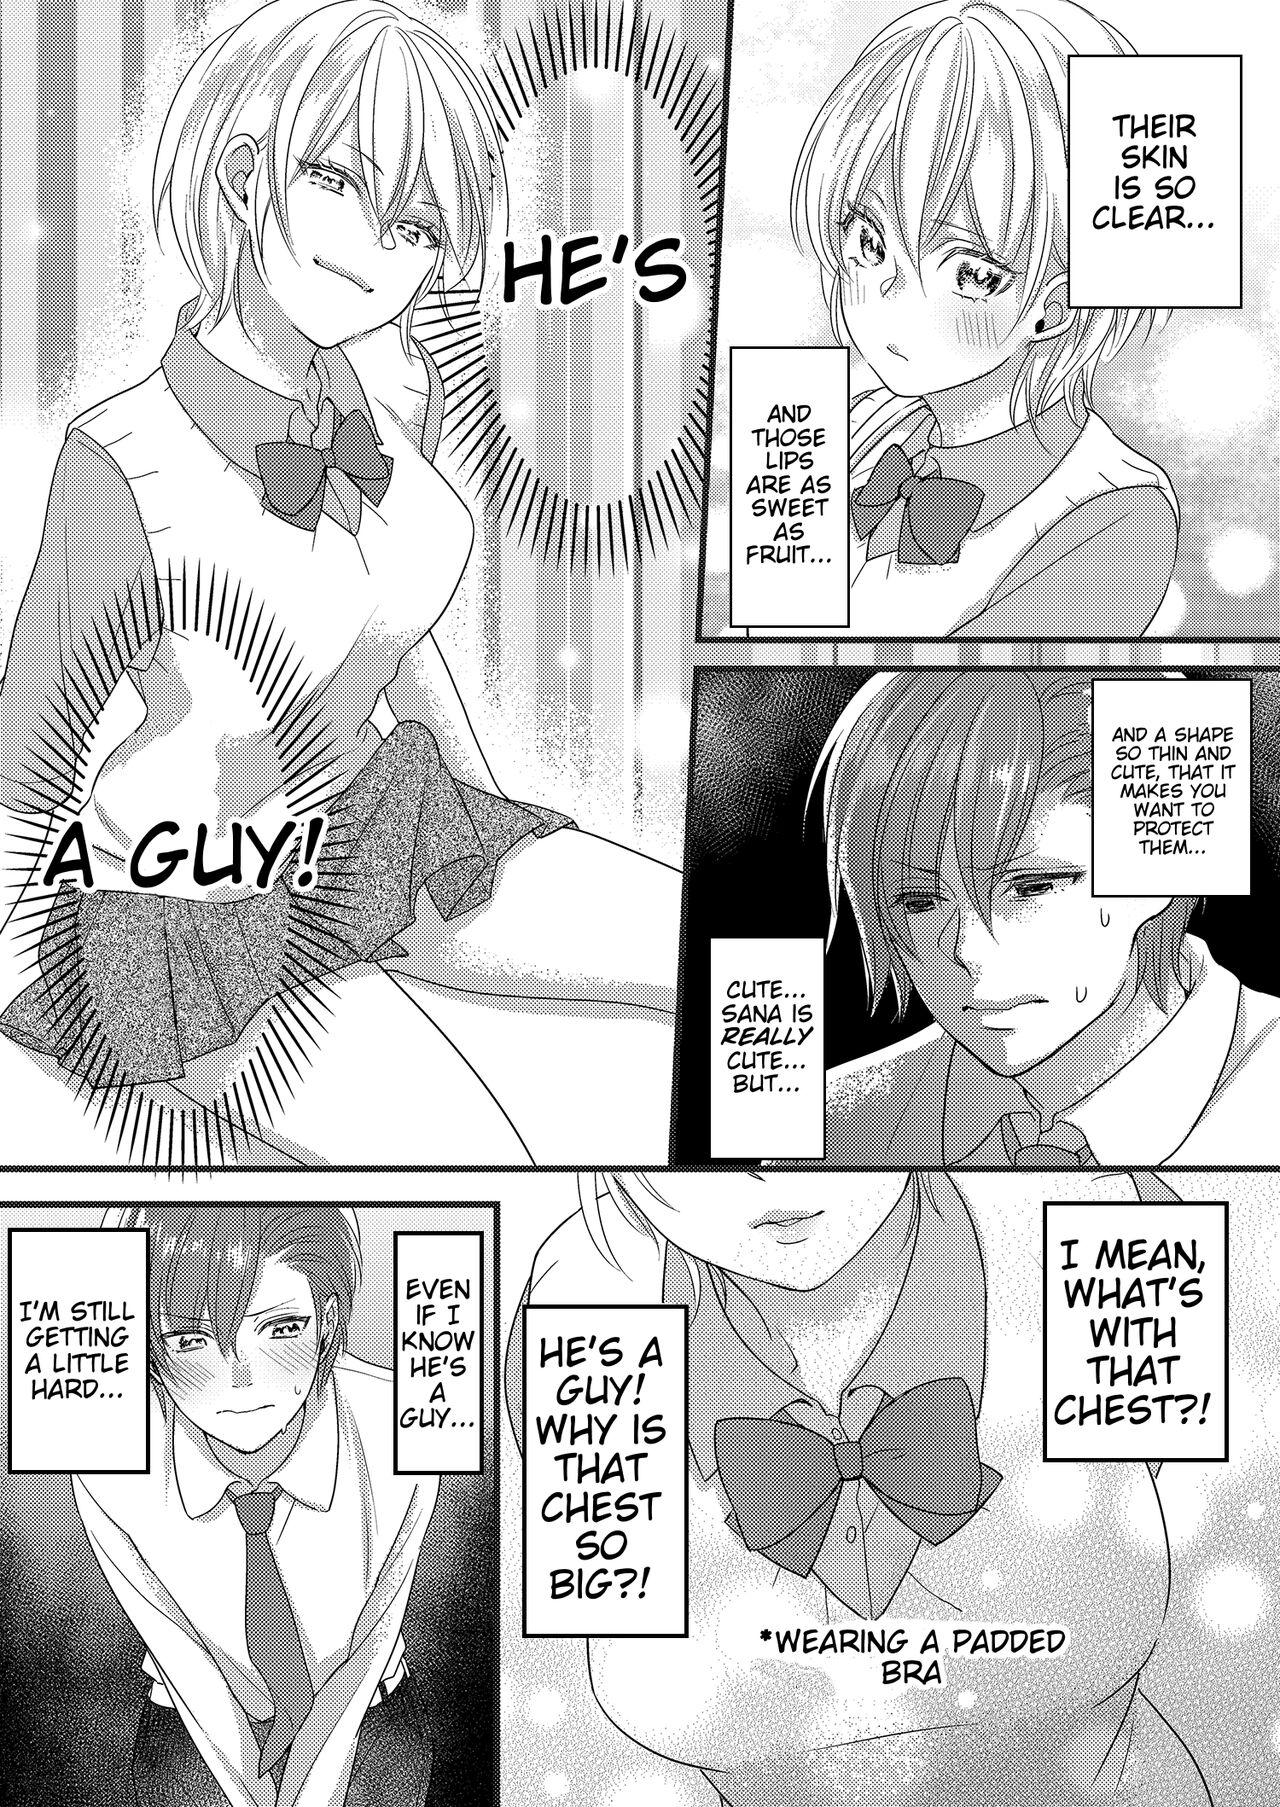 Buttplug Haru and Sana ～Love Connected Through Cosplay～ - Original Cum Swallow - Page 3